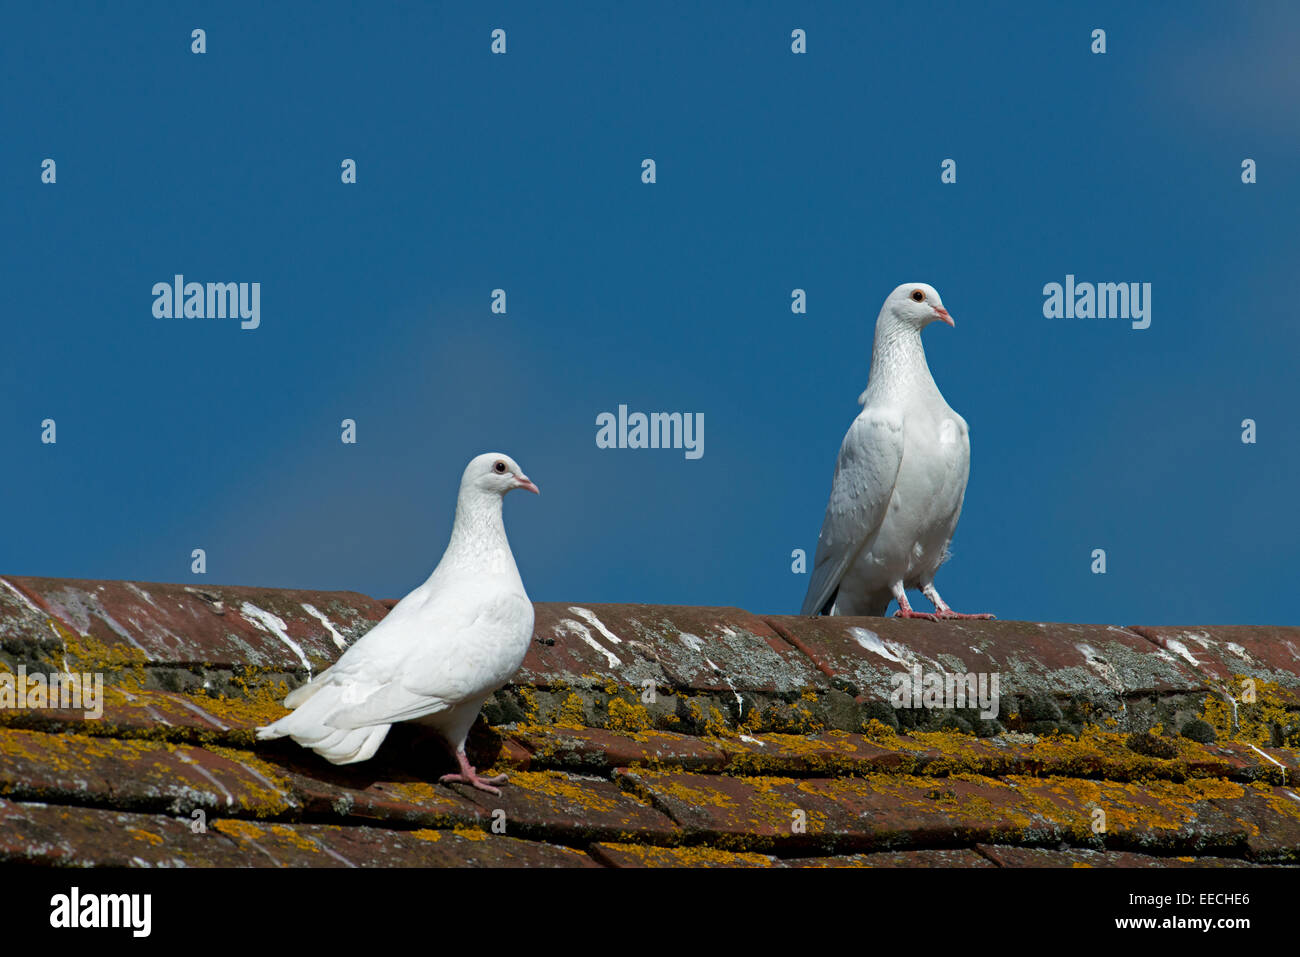 Pair of White Doves-Columba perched on lichen covered roof. Uk Stock Photo